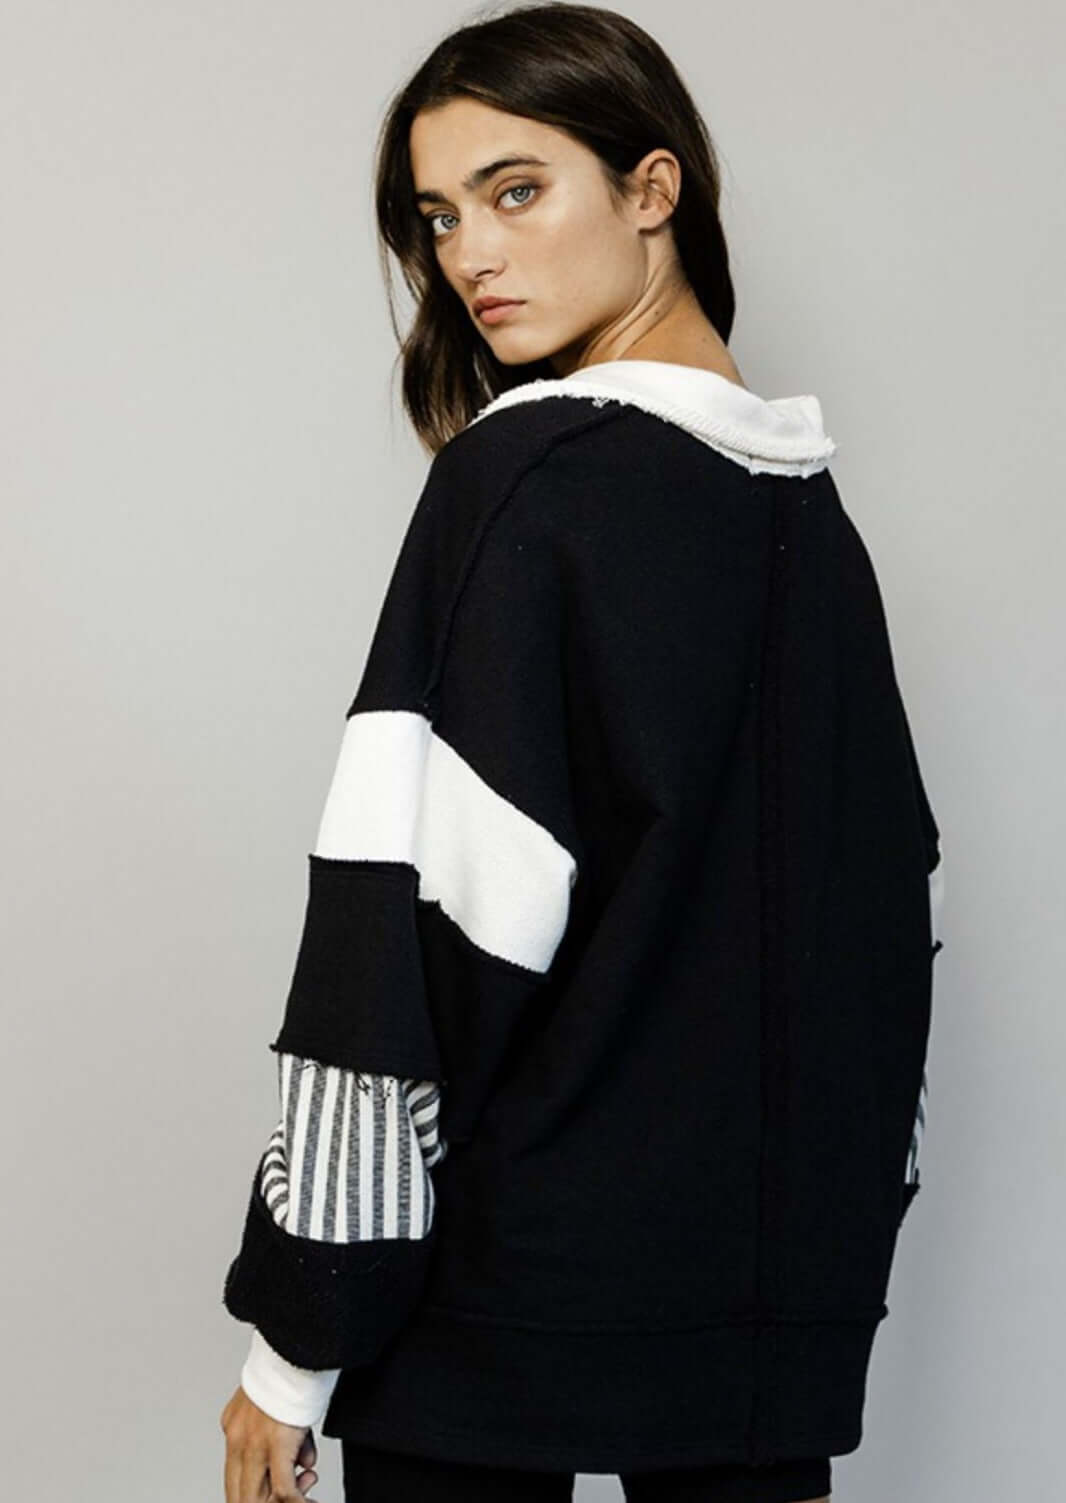 Made in USA | Brand: Bucket List Clothing Style# T2004 | Oversized Ladies French Terry Color Block Sweatshirt with Collar in Black & Ivory | Made in USA